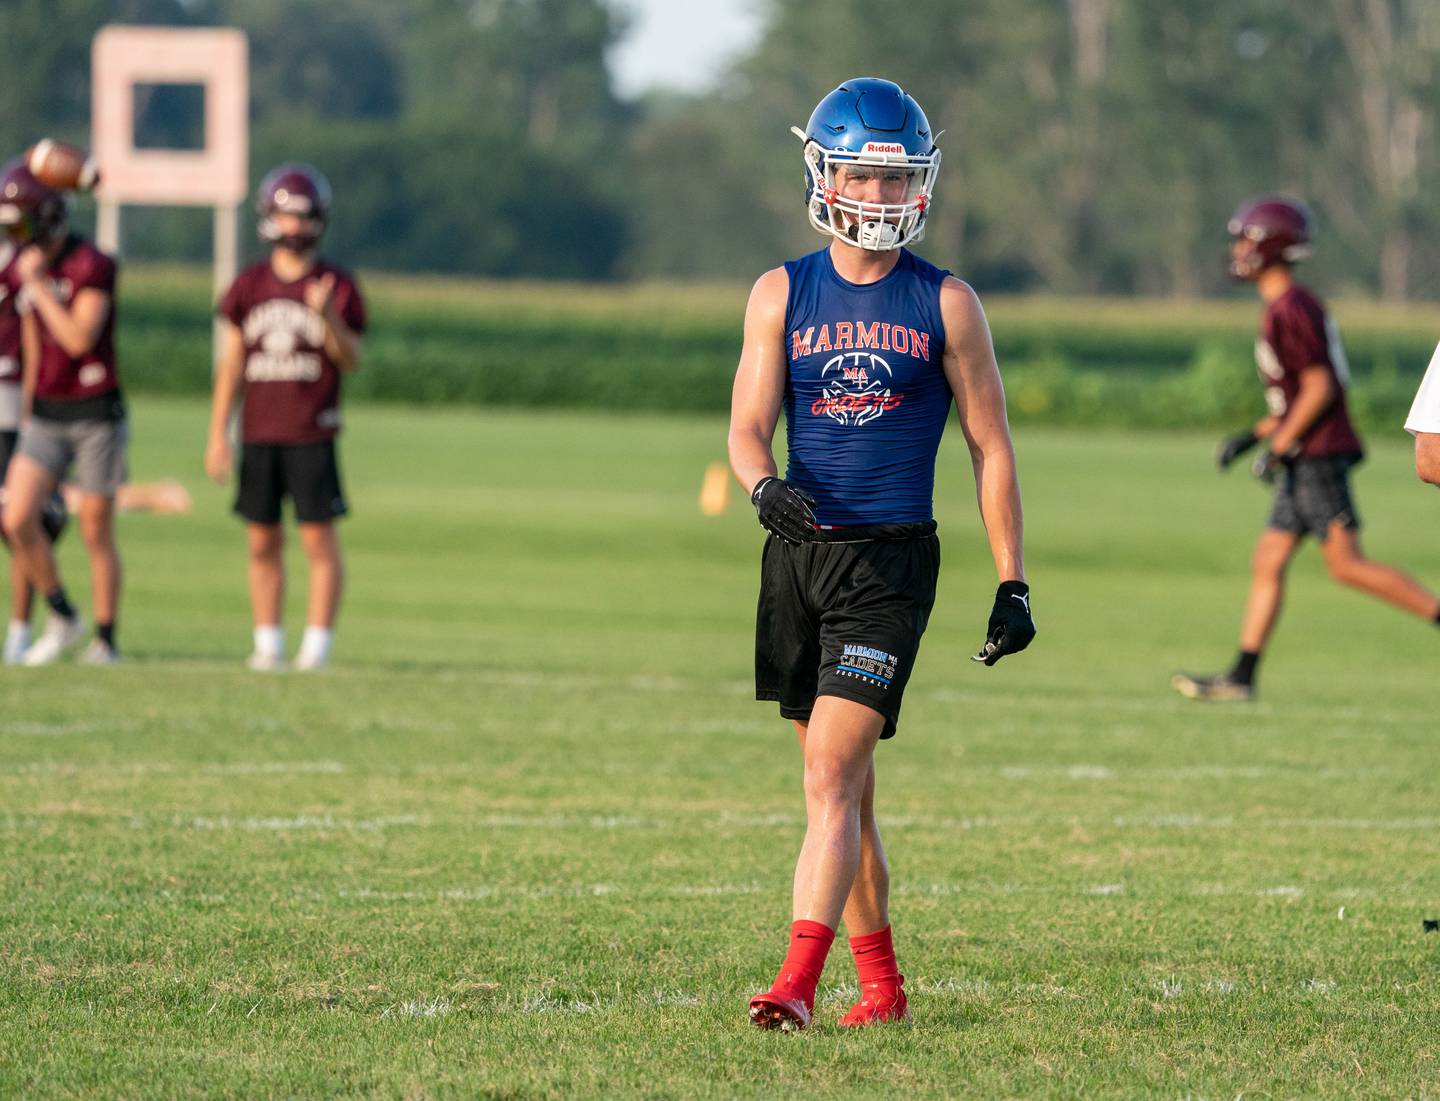 Marmion’s Dane Pardridge takes the field during a 7 on 7 football scrimmage at Kaneland High School in Maple Park on Tuesday, Jul 27, 2021.